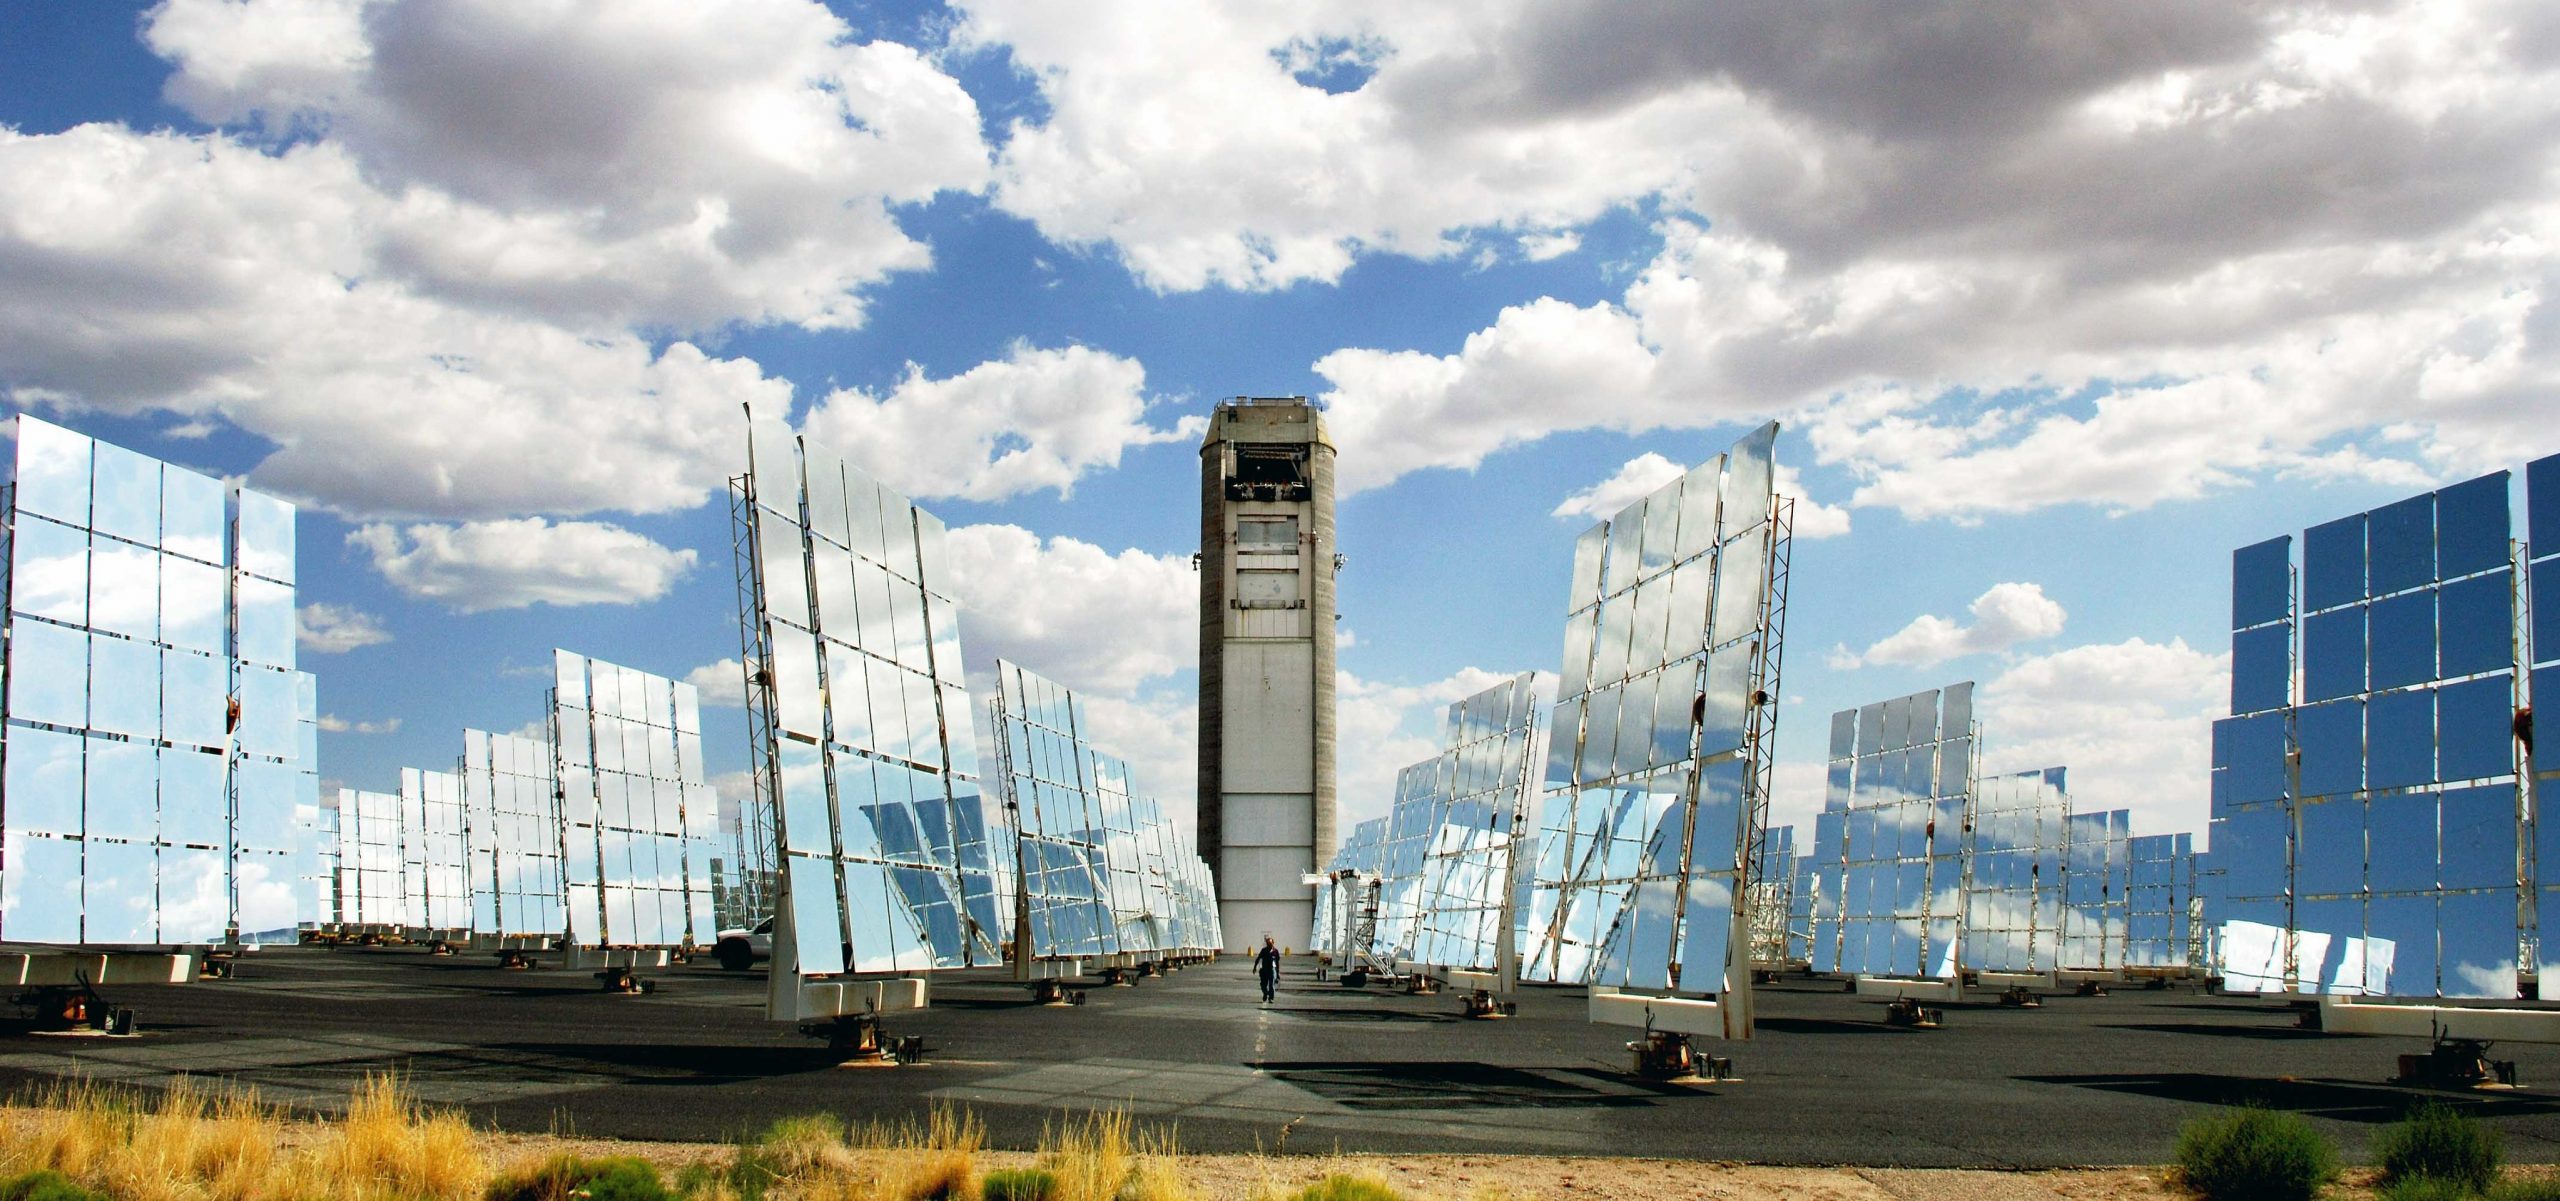 Solar tower surrounded by large mirrors